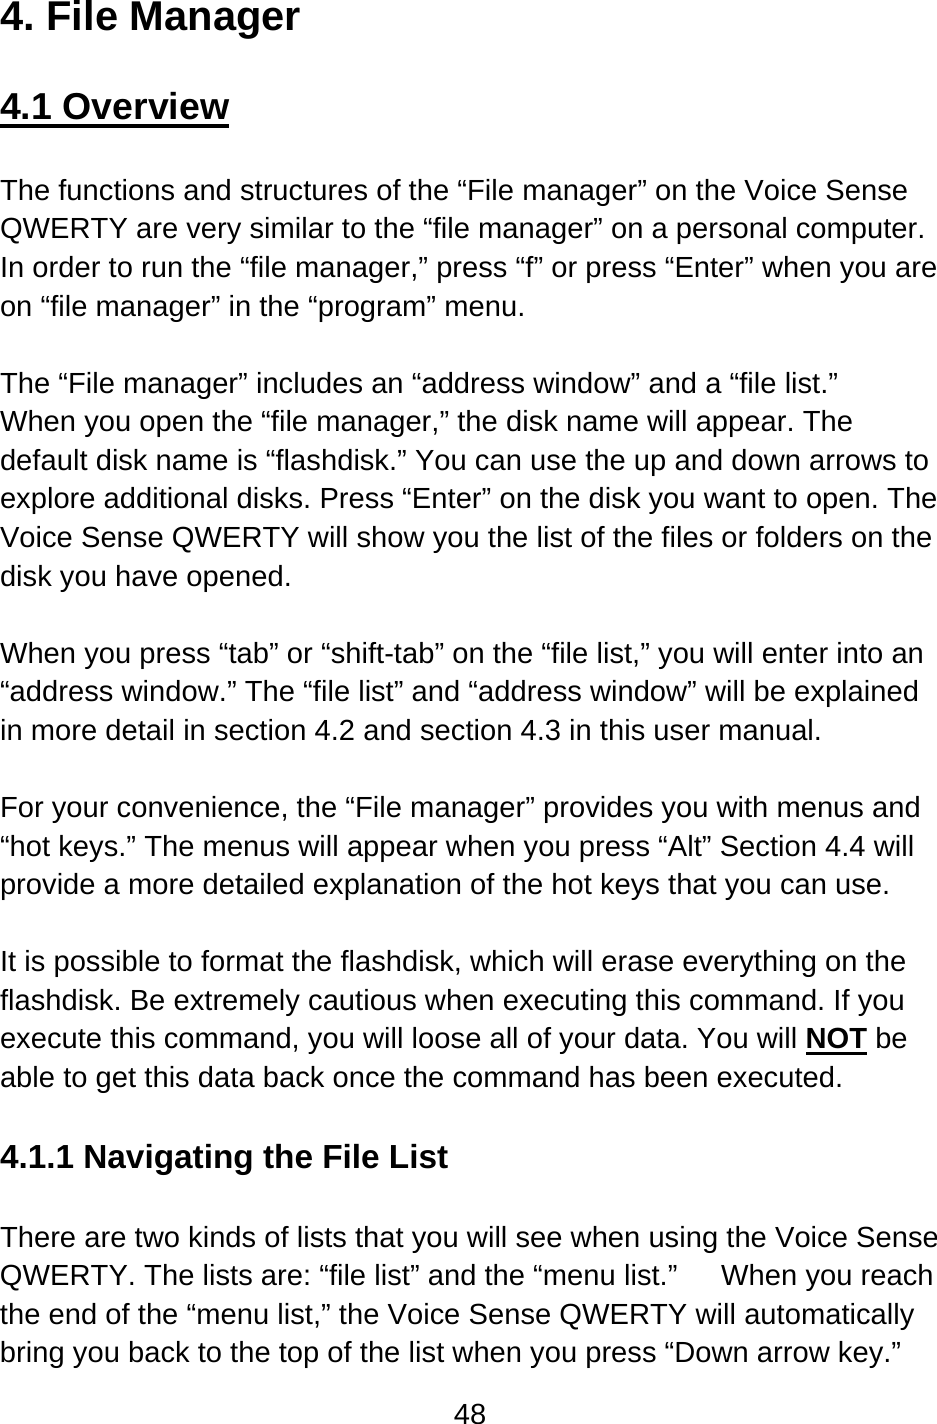 48  4. File Manager  4.1 Overview  The functions and structures of the “File manager” on the Voice Sense QWERTY are very similar to the “file manager” on a personal computer. In order to run the “file manager,” press “f” or press “Enter” when you are on “file manager” in the “program” menu.  The “File manager” includes an “address window” and a “file list.”   When you open the “file manager,” the disk name will appear. The default disk name is “flashdisk.” You can use the up and down arrows to explore additional disks. Press “Enter” on the disk you want to open. The Voice Sense QWERTY will show you the list of the files or folders on the disk you have opened.  When you press “tab” or “shift-tab” on the “file list,” you will enter into an “address window.” The “file list” and “address window” will be explained in more detail in section 4.2 and section 4.3 in this user manual.  For your convenience, the “File manager” provides you with menus and “hot keys.” The menus will appear when you press “Alt” Section 4.4 will provide a more detailed explanation of the hot keys that you can use.  It is possible to format the flashdisk, which will erase everything on the flashdisk. Be extremely cautious when executing this command. If you execute this command, you will loose all of your data. You will NOT be able to get this data back once the command has been executed.  4.1.1 Navigating the File List  There are two kinds of lists that you will see when using the Voice Sense QWERTY. The lists are: “file list” and the “menu list.”      When you reach the end of the “menu list,” the Voice Sense QWERTY will automatically bring you back to the top of the list when you press “Down arrow key.” 